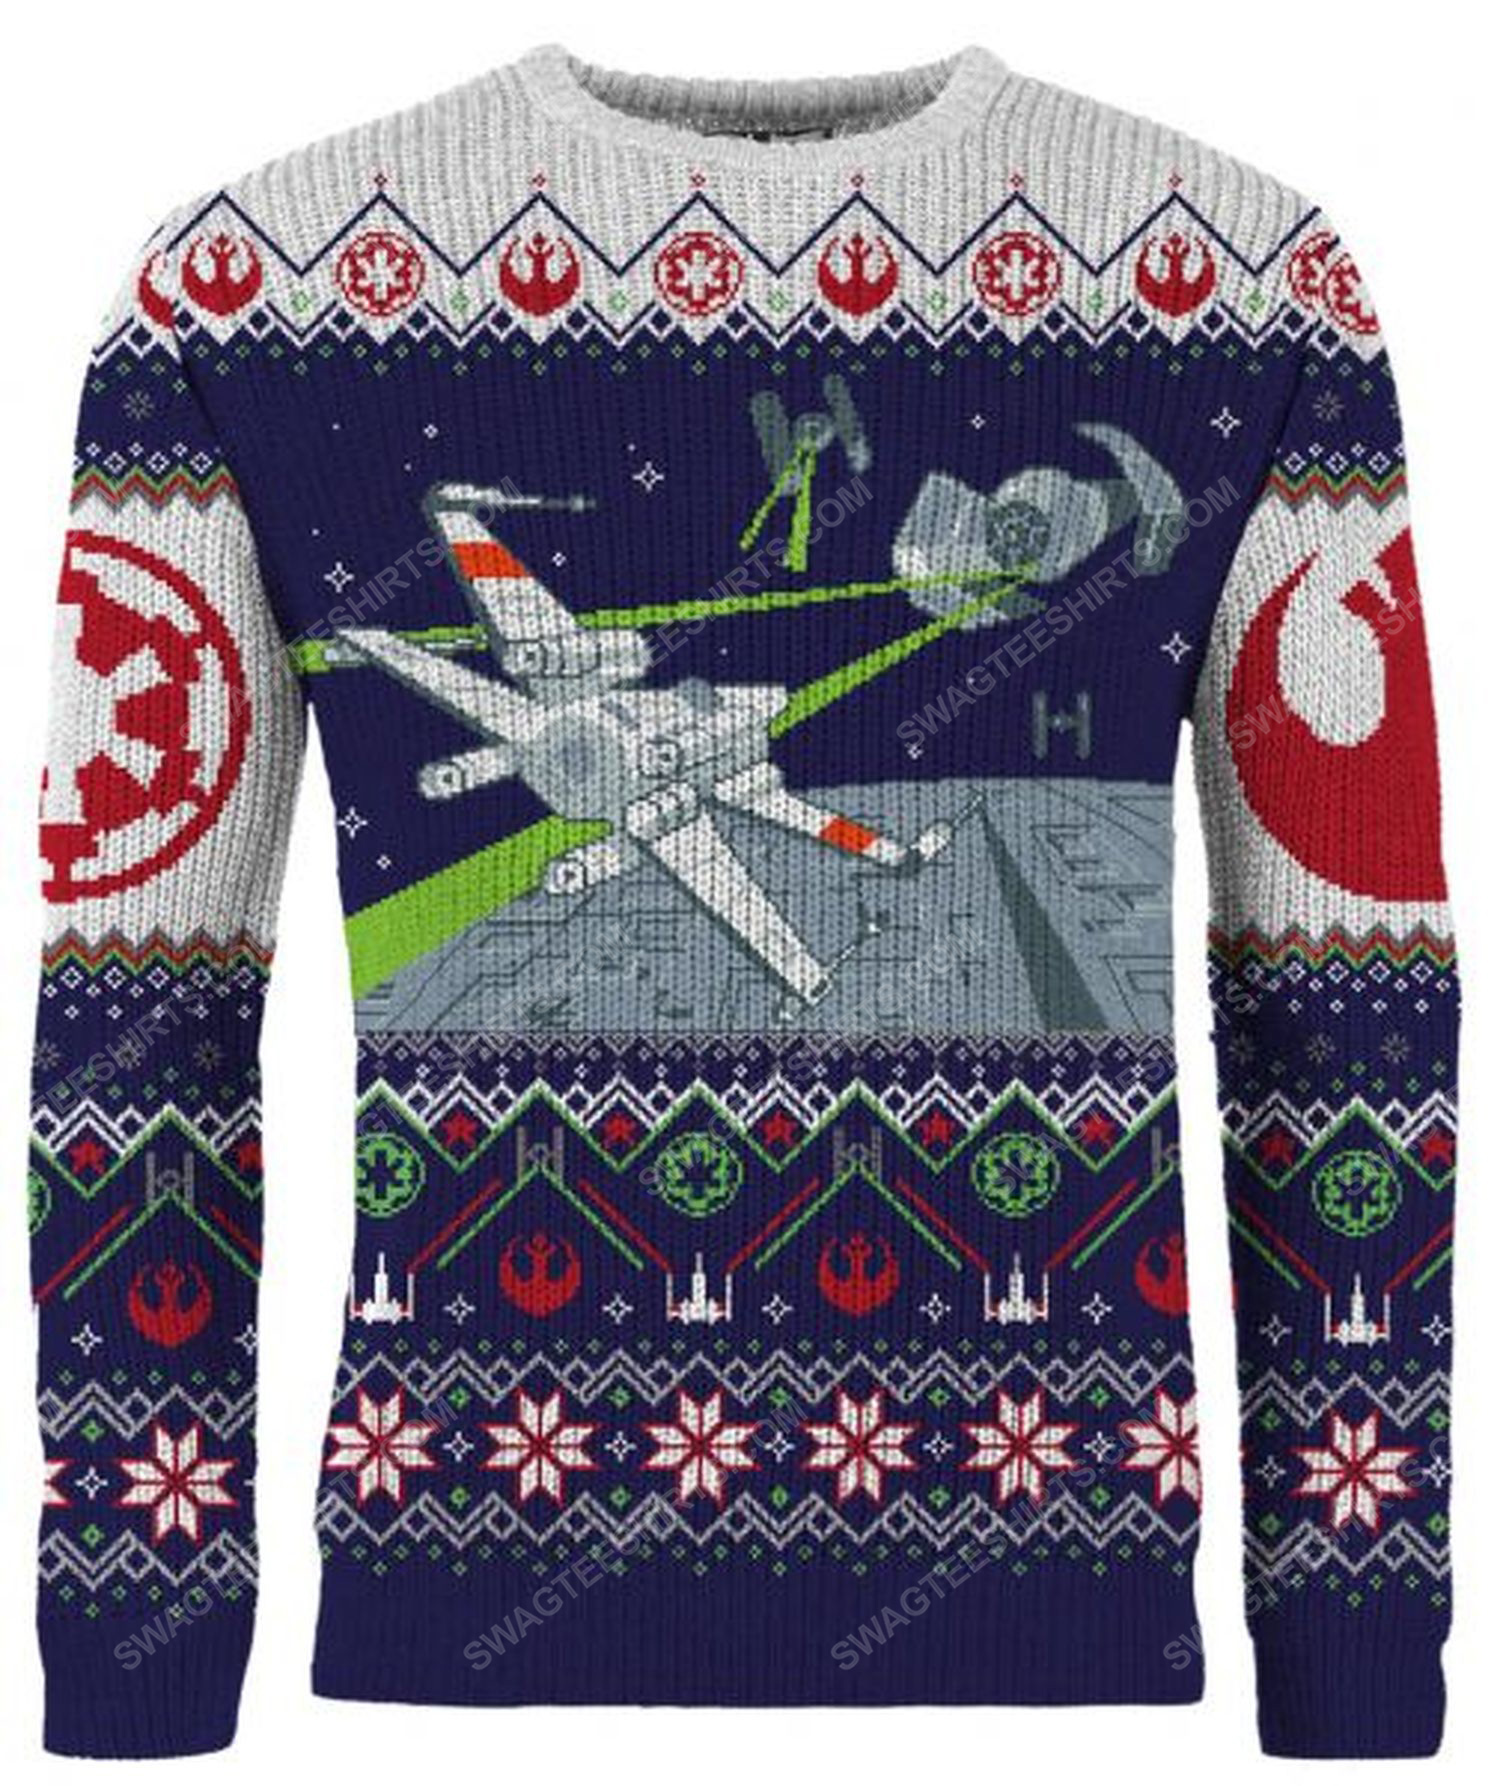 Star wars x-wing and tie fighter full print ugly christmas sweater 2 - Copy (2)